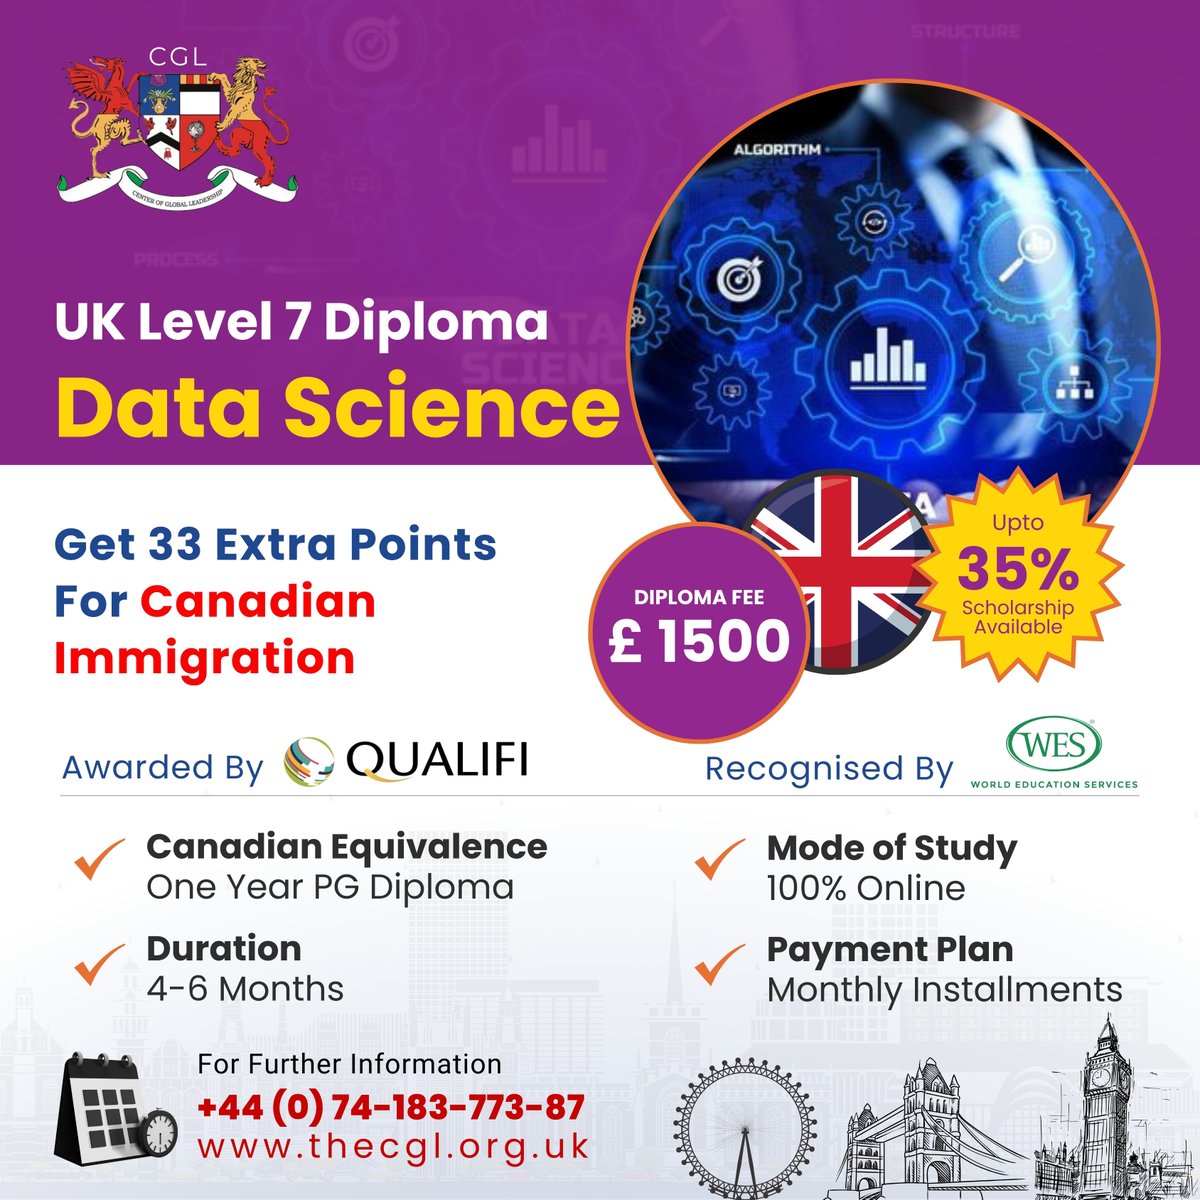 Study Data Science in the UK and Score 33 Points for Canadian Immigration! 

📆 Schedule your appointment with our consultants.  ☎ +44 (0) 74-183-773-87 
🌎 thecgl.org.uk 
📧 info@thecgl.org.uk  

#CGL #DataScience #StudyInUK #ImmigrationToCanada #StudyAbroadLife